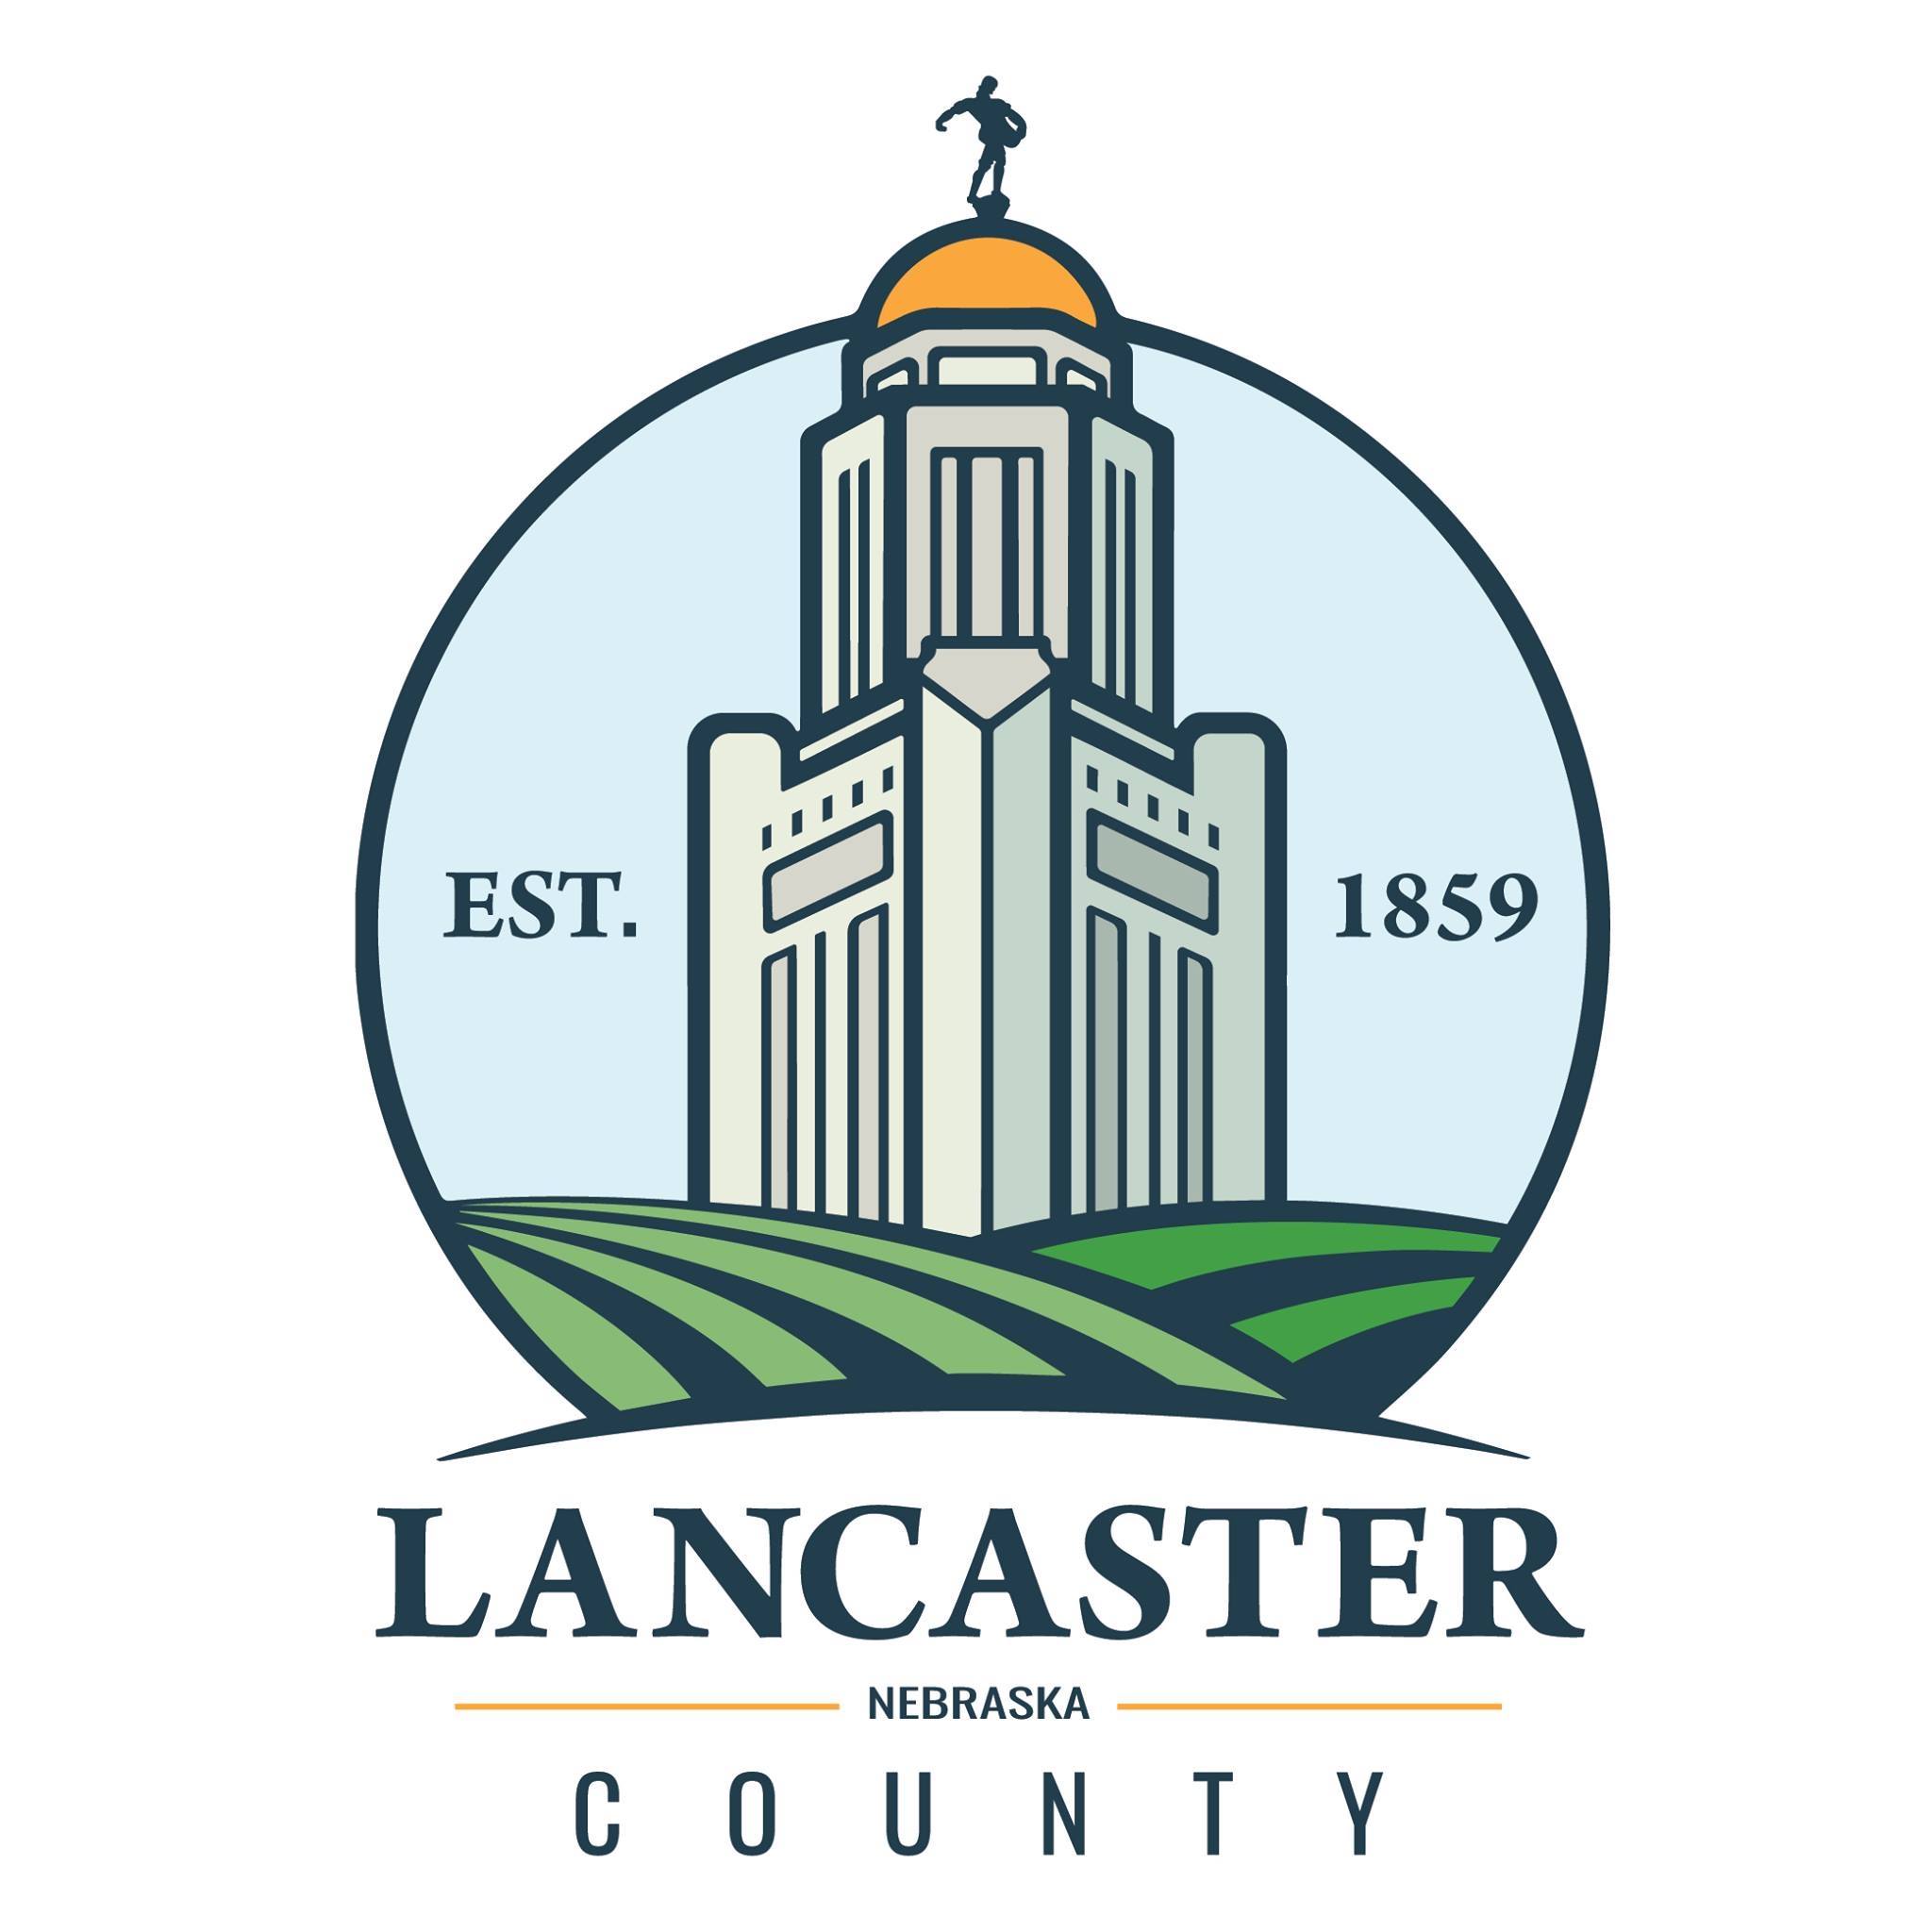 Company logo of Lancaster Weed Control Auth